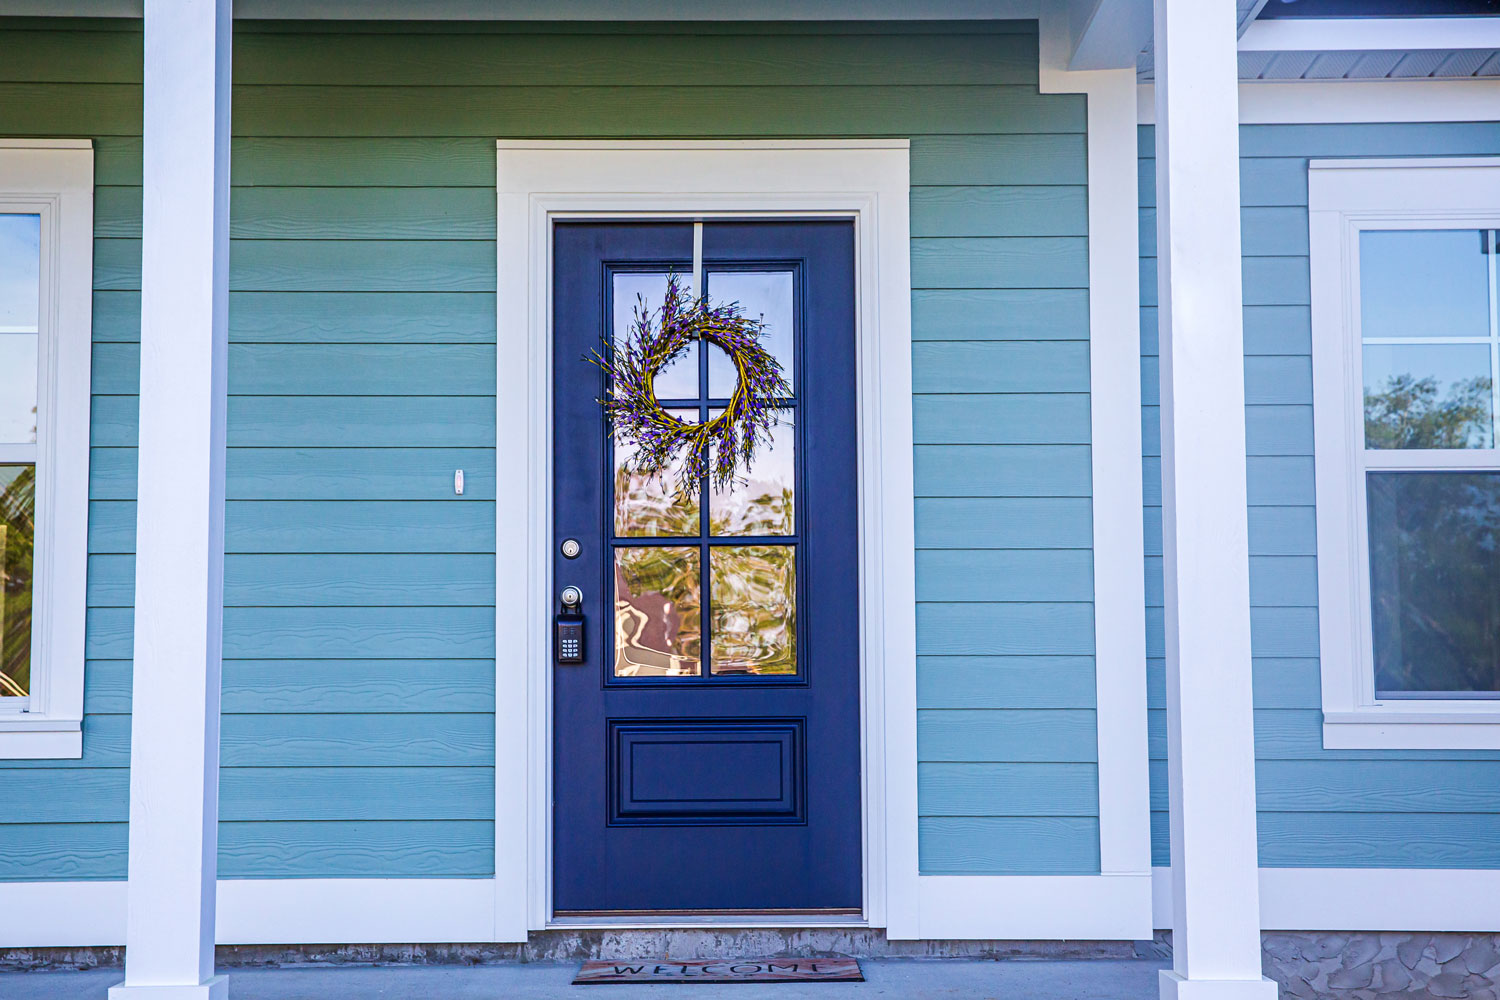 A gorgeous front porch with wooden sidings, blue front door with a decorative wreath and white trims, 15 Blue Front Door Ideas